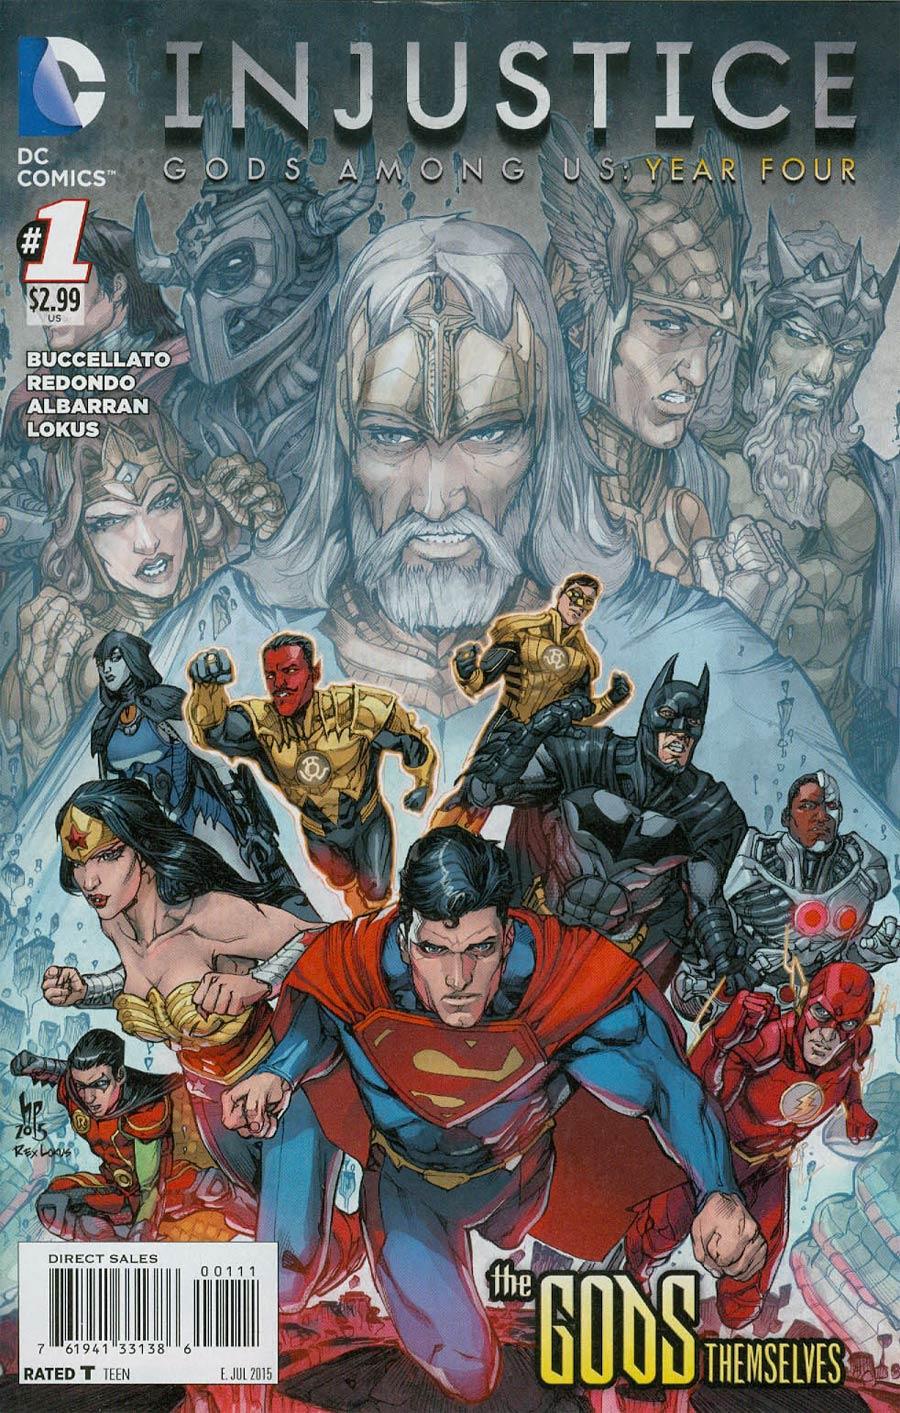 Injustice: Year Four Vol. 1 #1